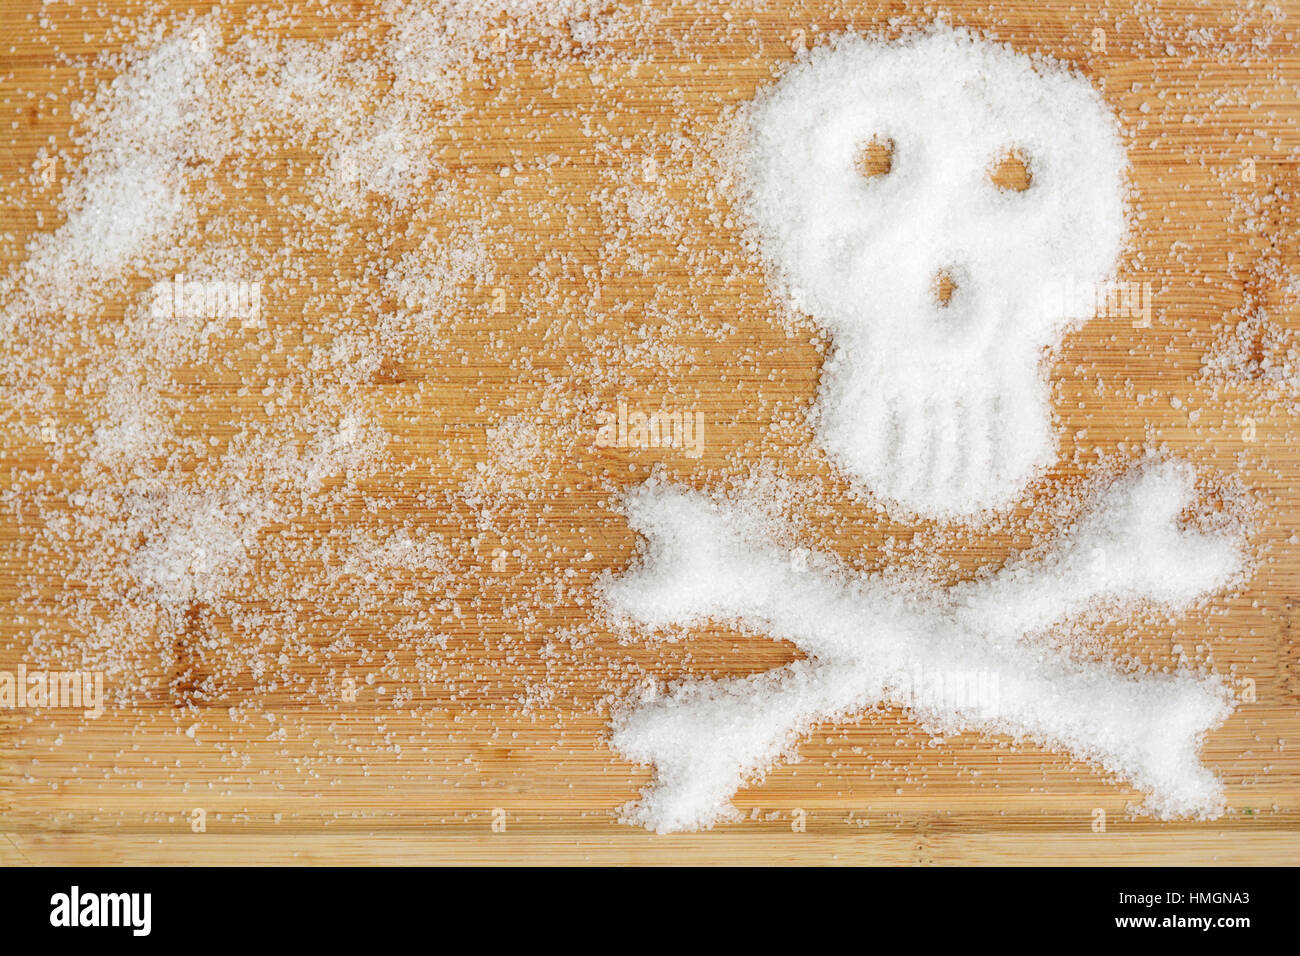 Deadly sugar addiction suggested by spilled white sugar crystals forming a skull on a wooden table Stock Photo